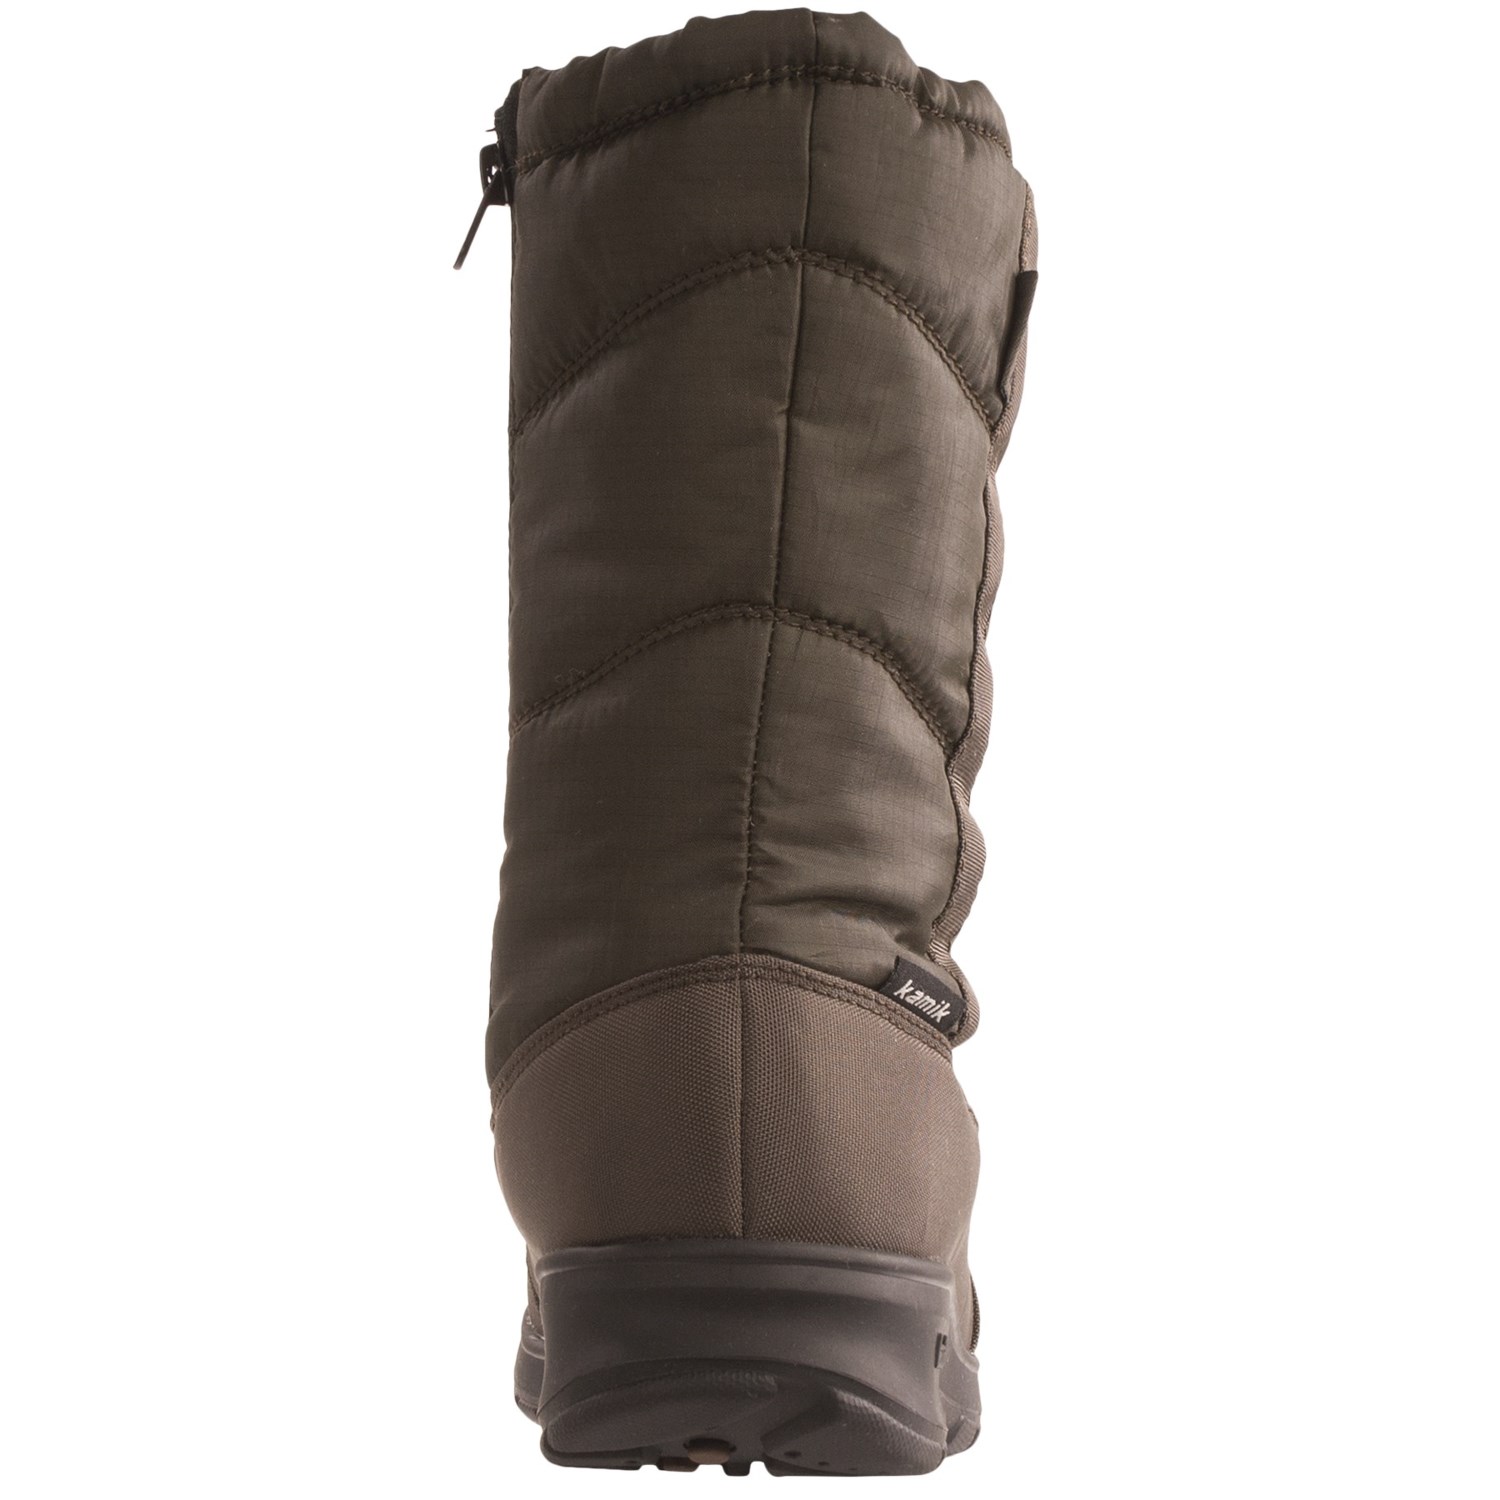 Ladies Clearance Snow Boots | Division of Global Affairs